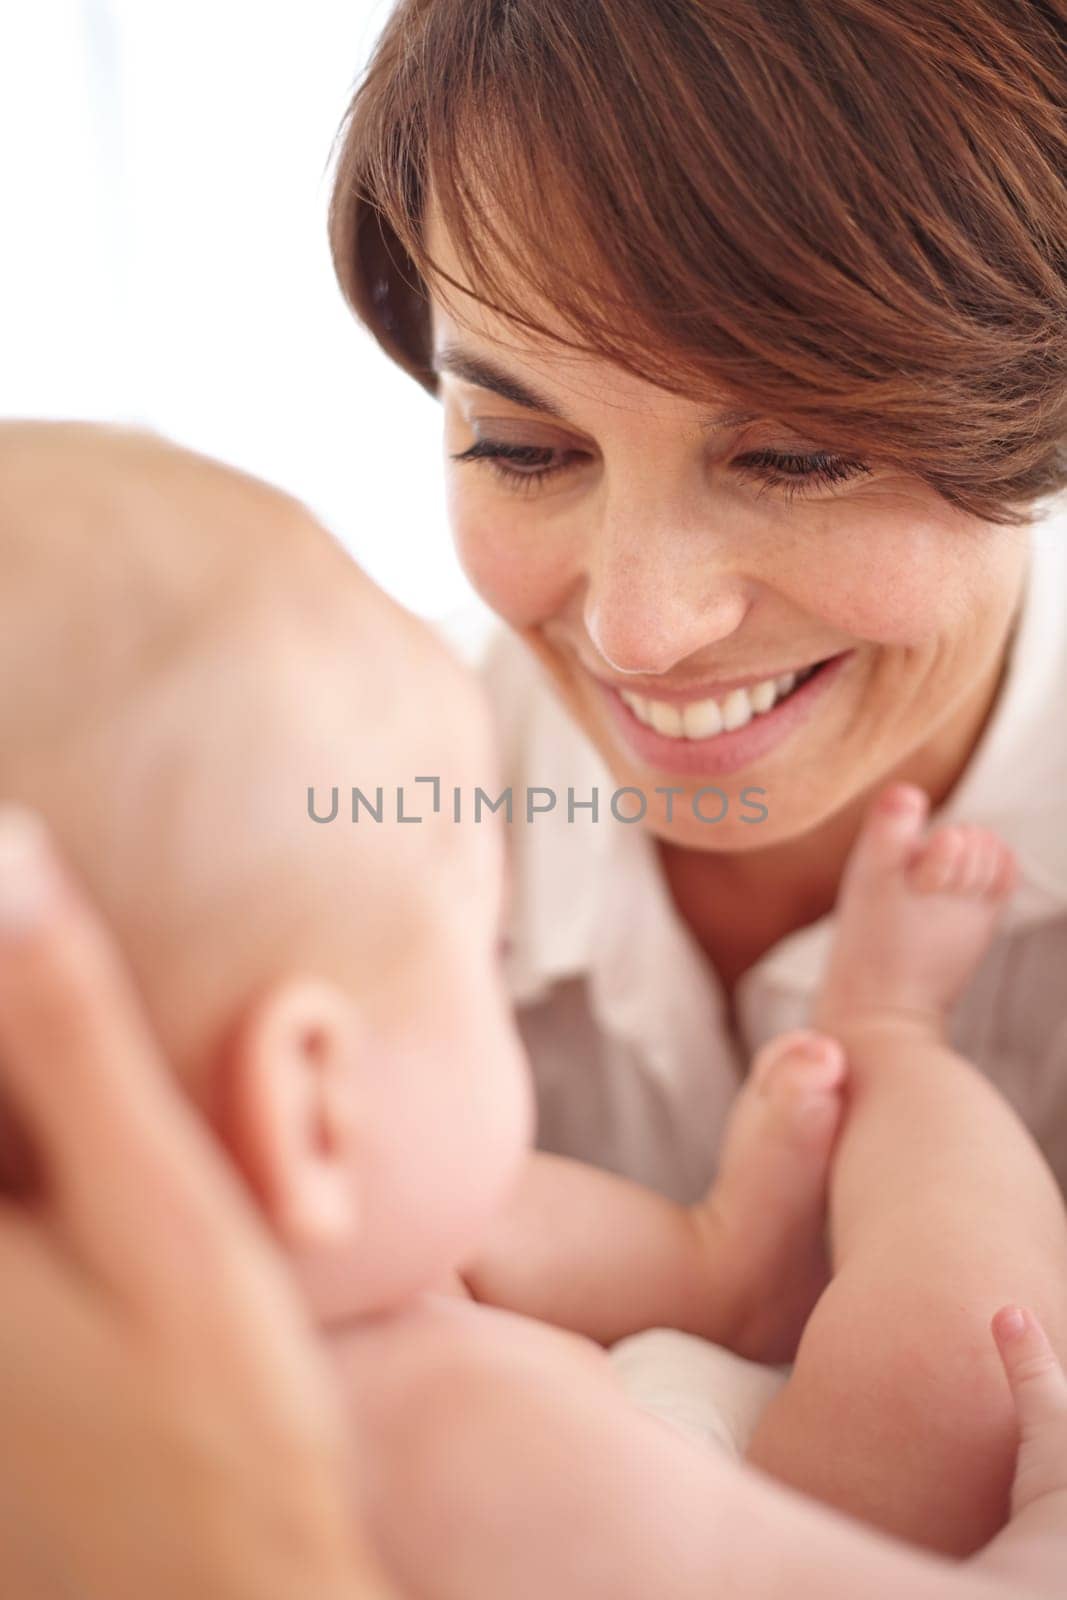 Mother, baby and happiness or love, smile and relaxing or care, bonding and joy in parenthood. Mom, newborn and peace or calm at home, positive and happy for child development, joy and fun together.